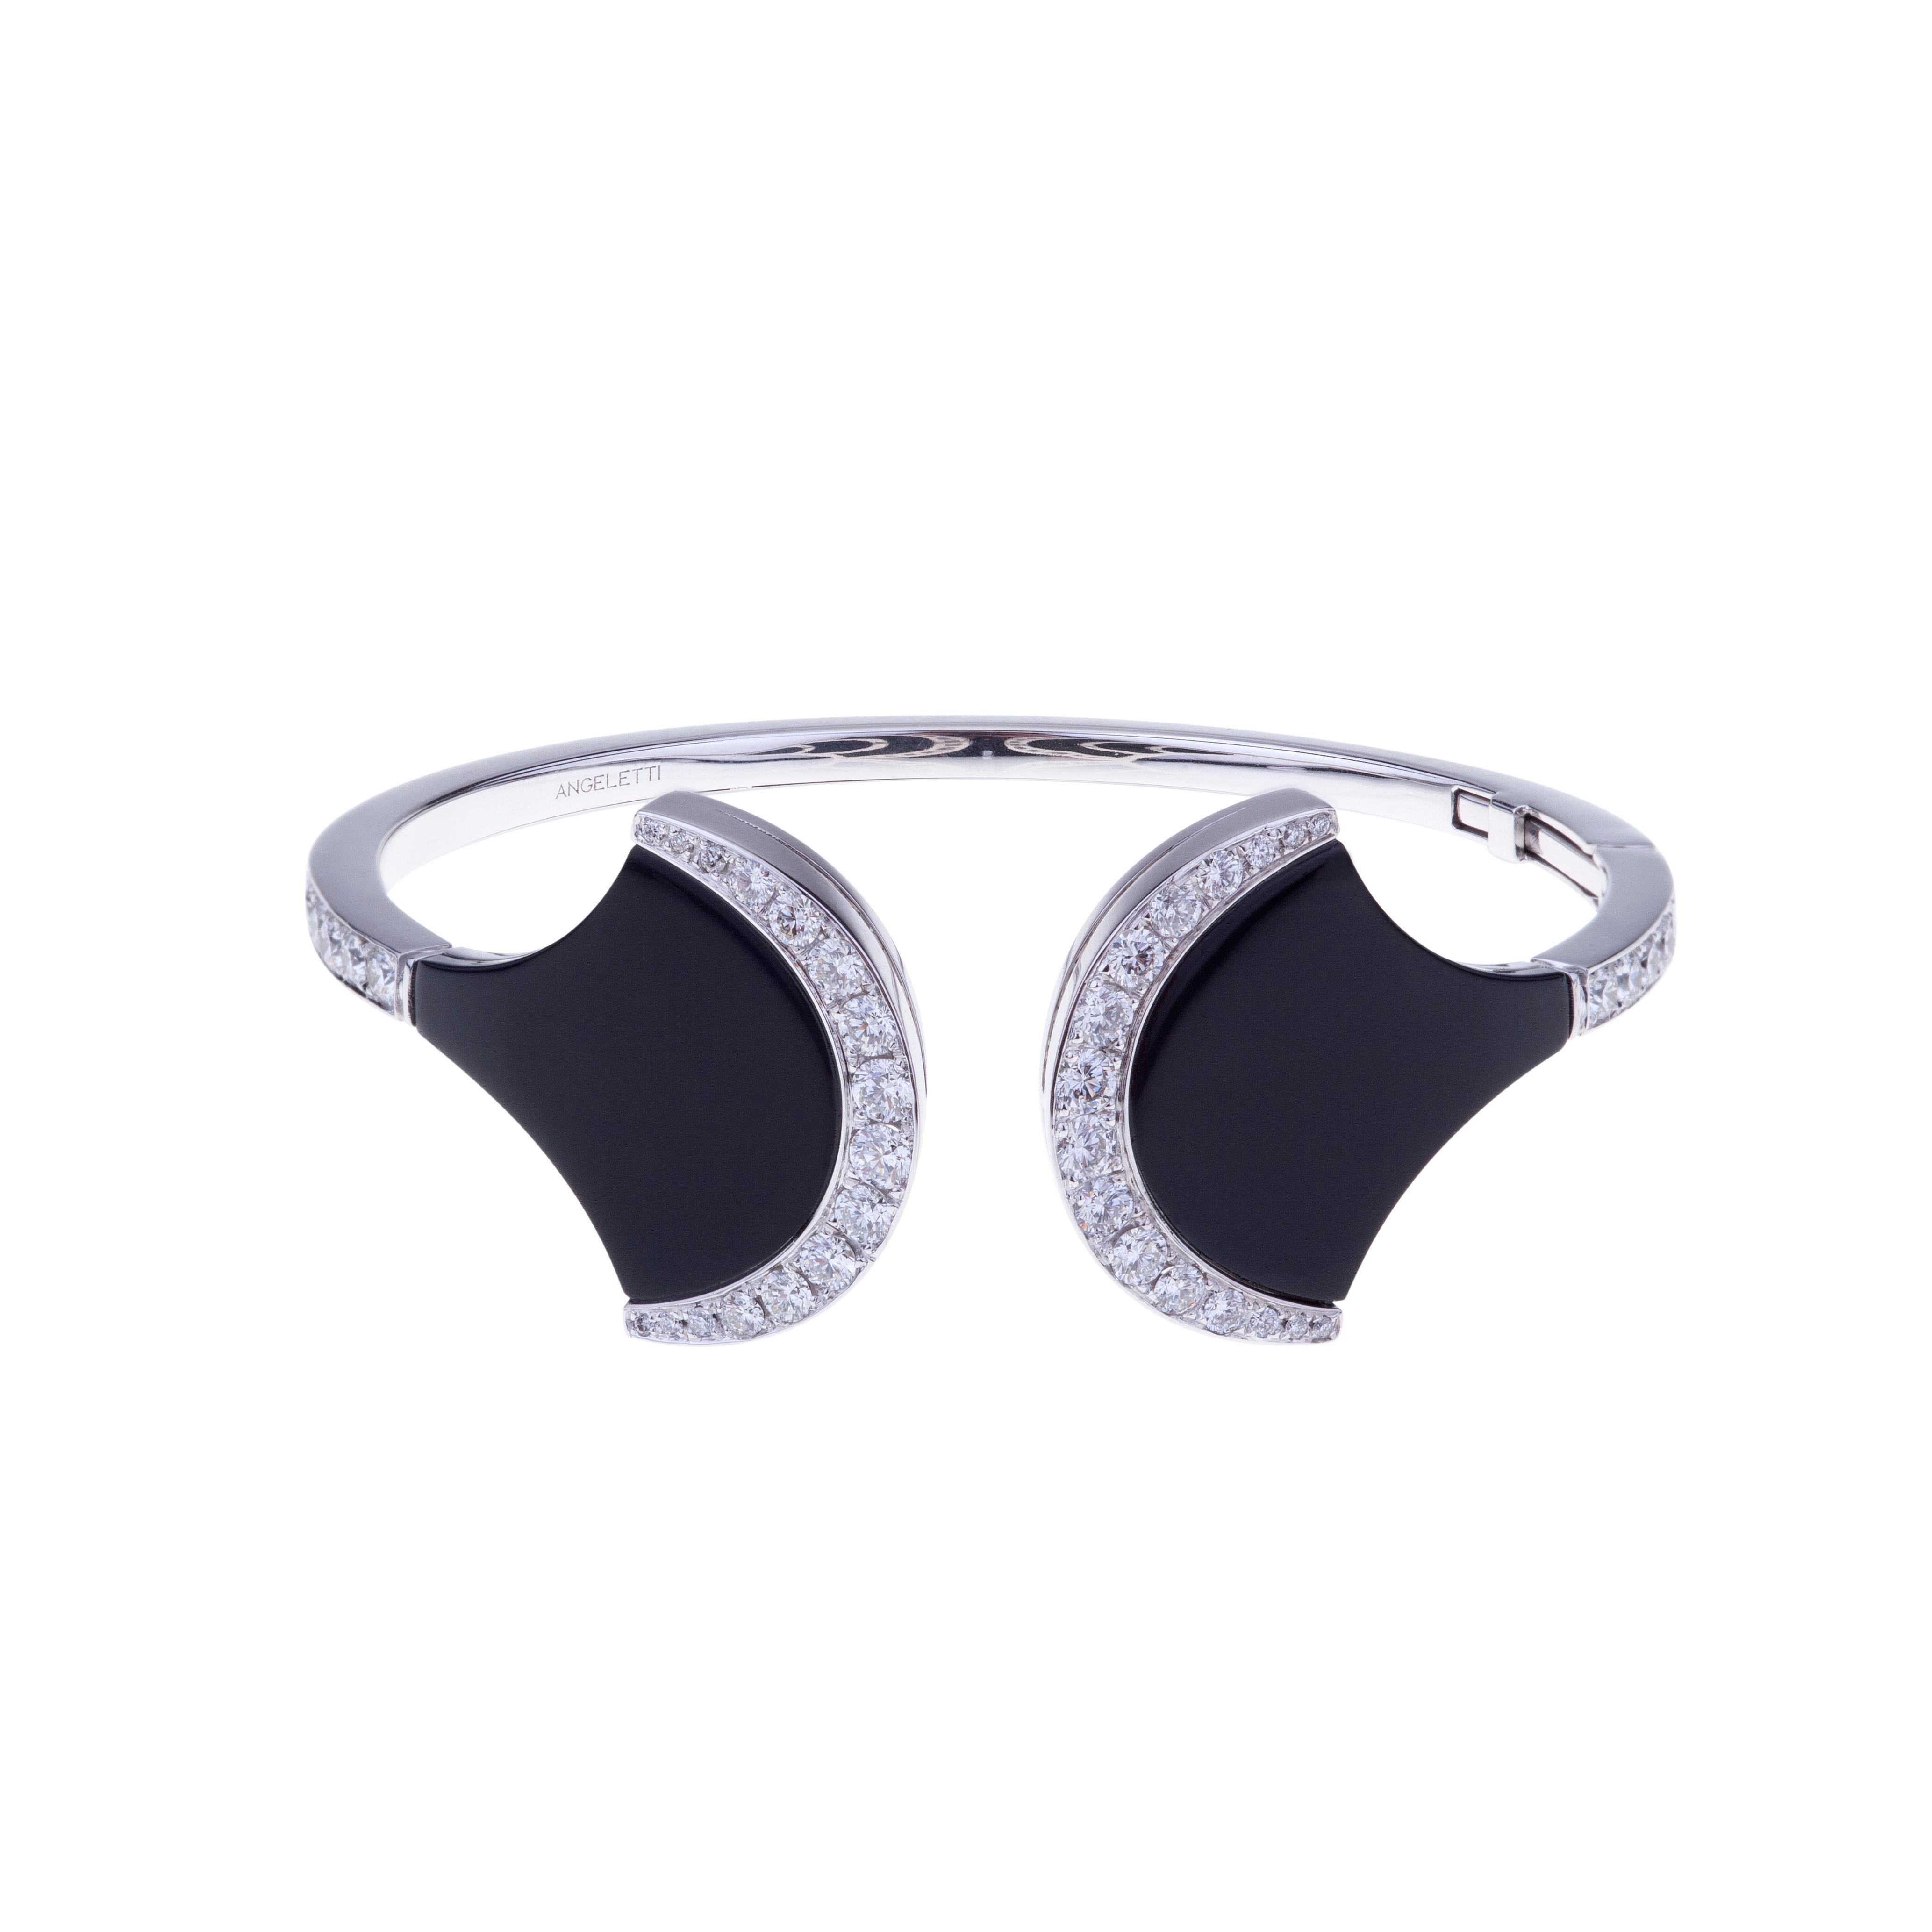 Exclusive Wave Bangle White Gold with Black Ceramic and Diamonds.
Everyday Fashionable Bangle with Glossy Ceramic and Diamond ct. 1.94 G-SI. 18kt Gold is around  15 grams. 
Angeletti Boasts an Exceptional History Made of Pure Jewelry Tradition, a